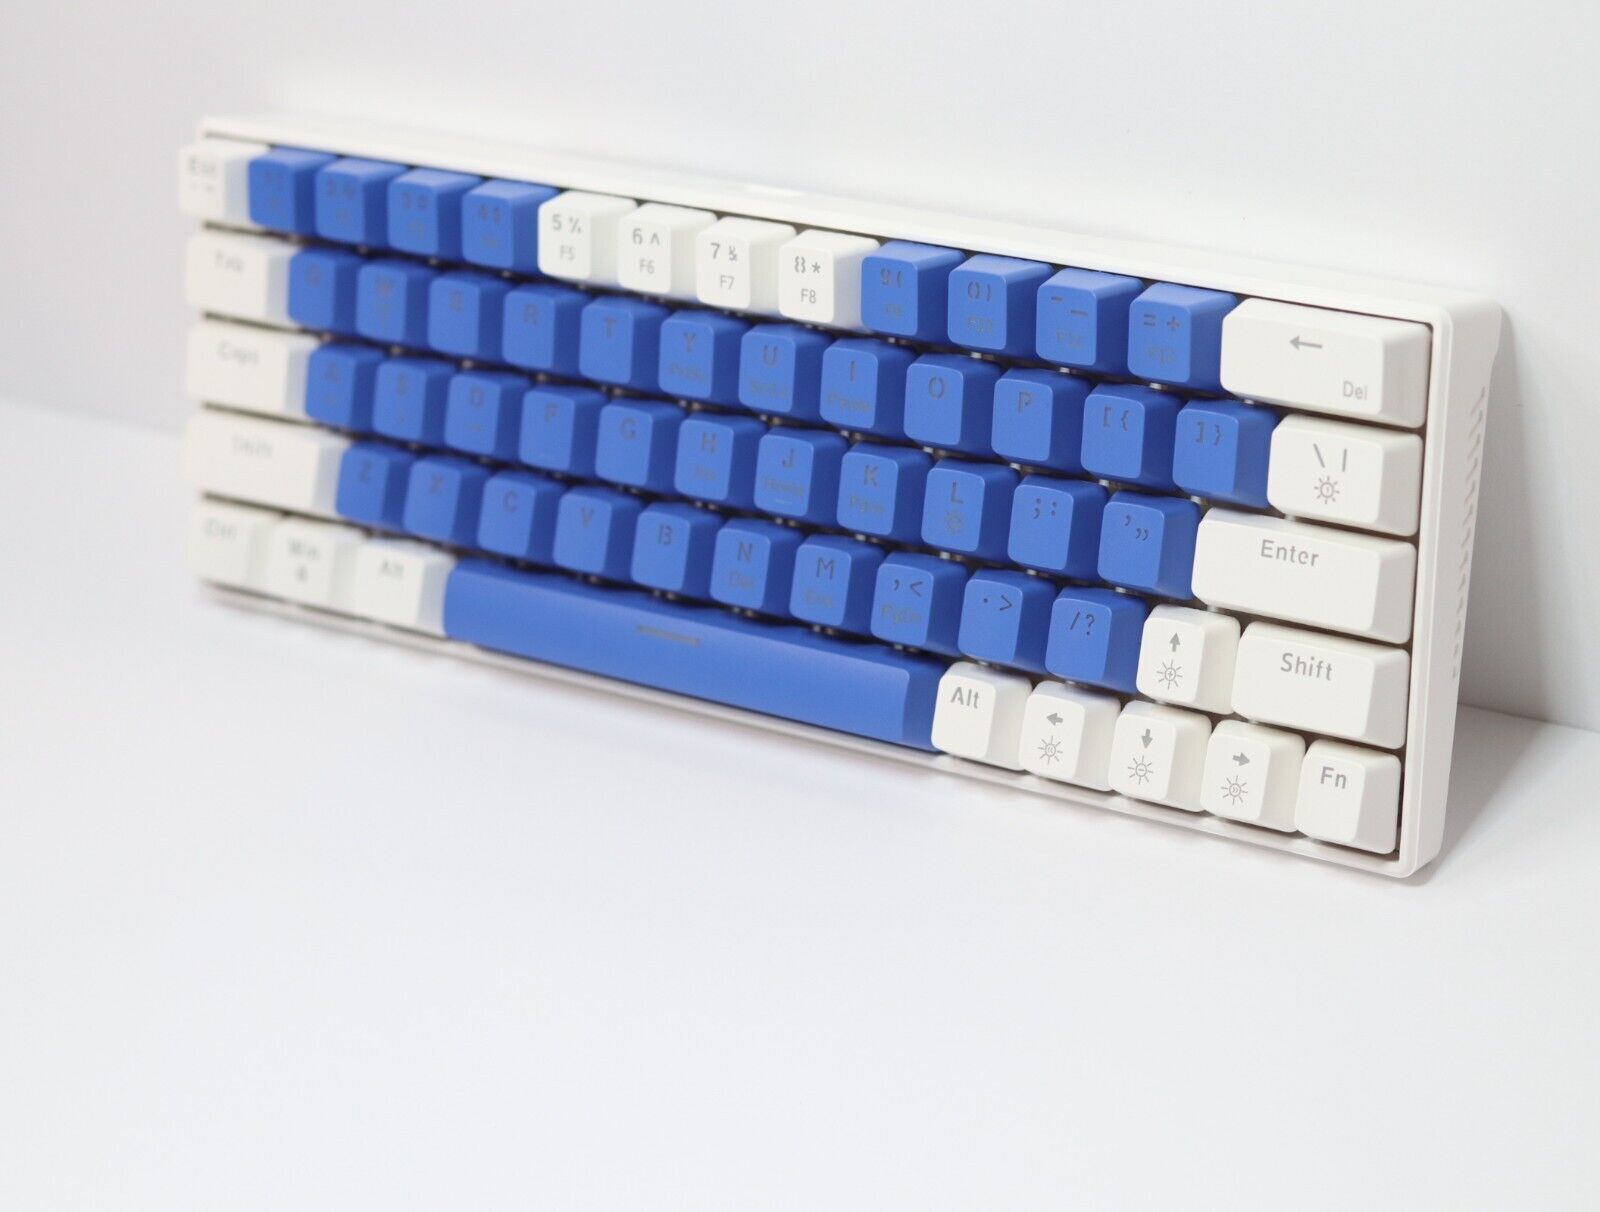 60% Hot-Swap Mechanical Keyboard - Red Switches - USB C - Blue/White